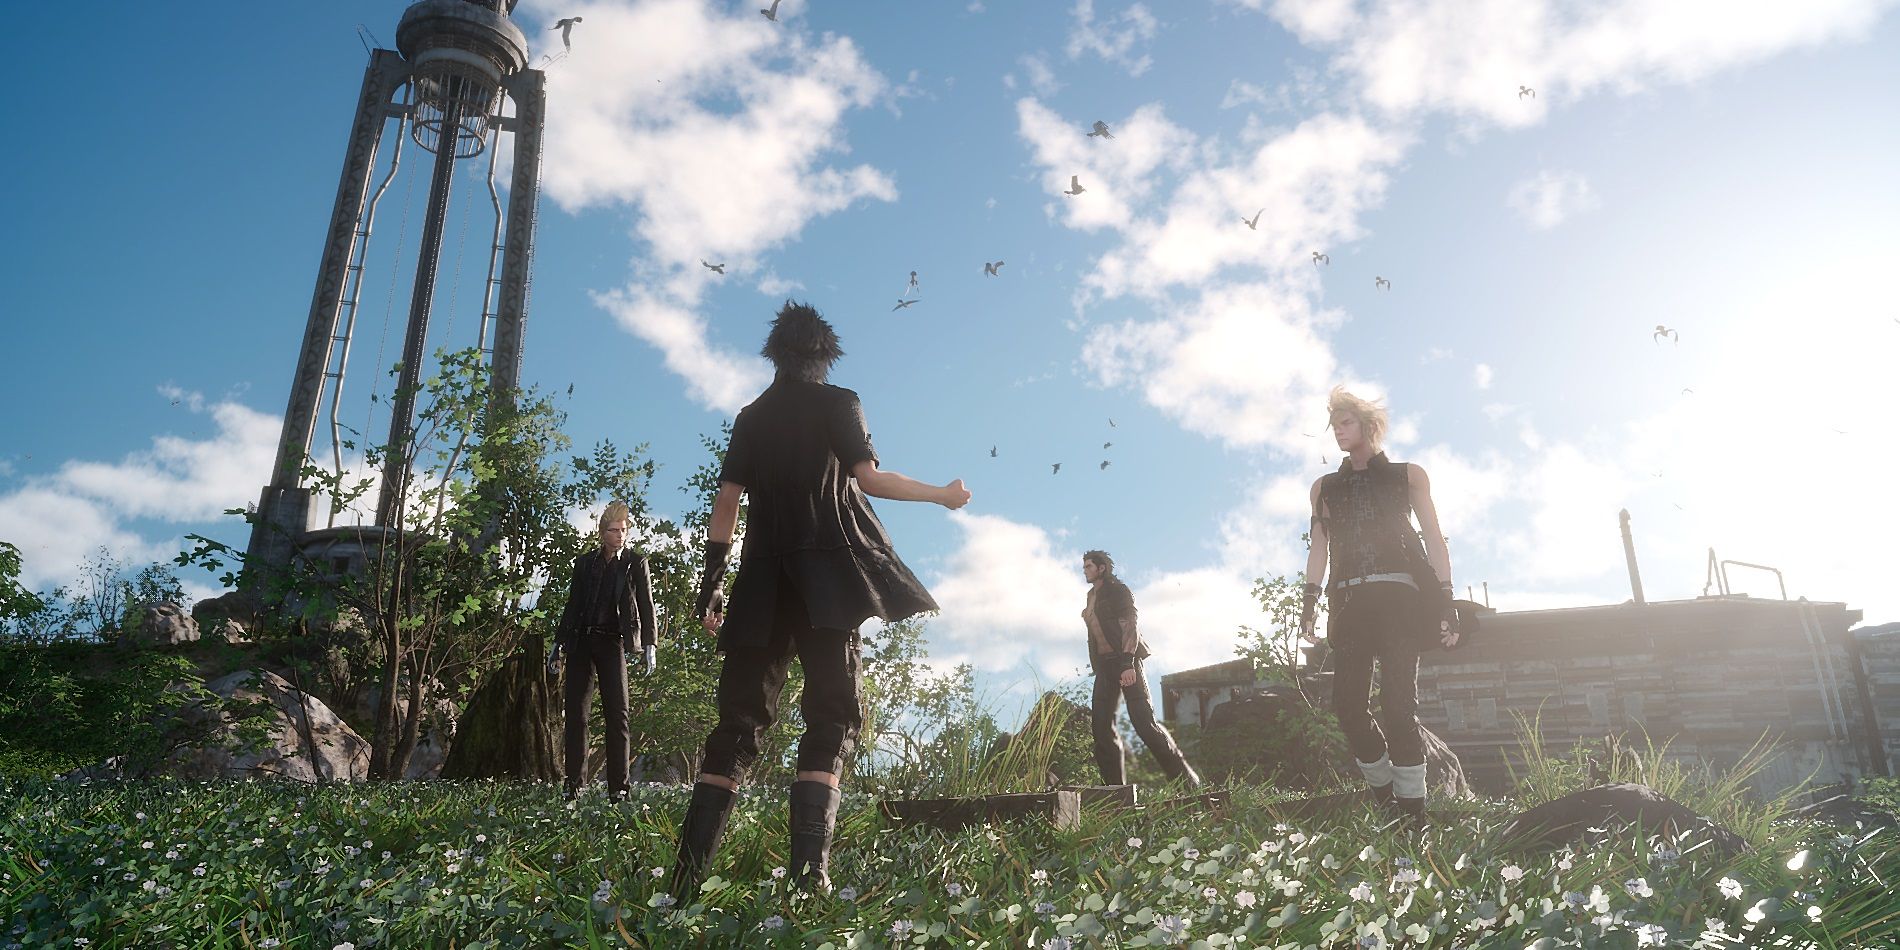 Final Fantasy XV, Noctis and his friends pausing in a field